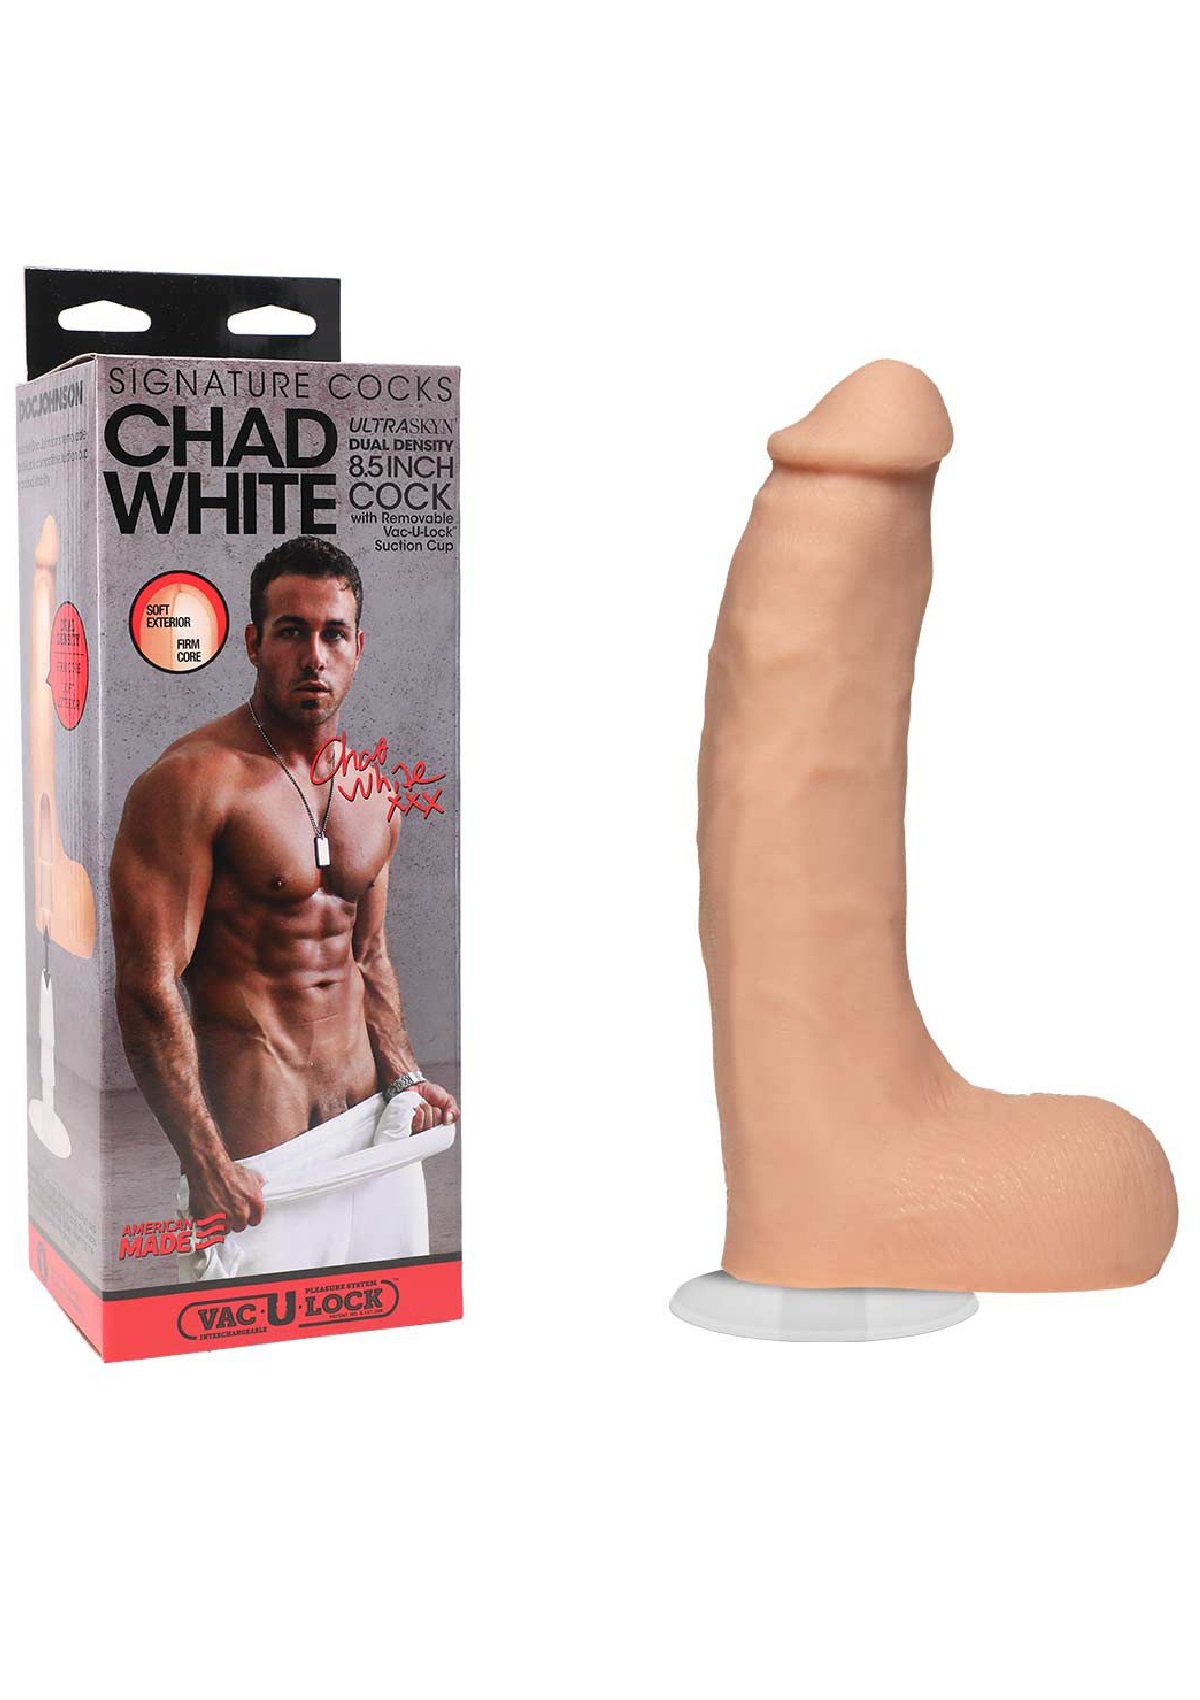 Chad White ULTRASKYN dong.